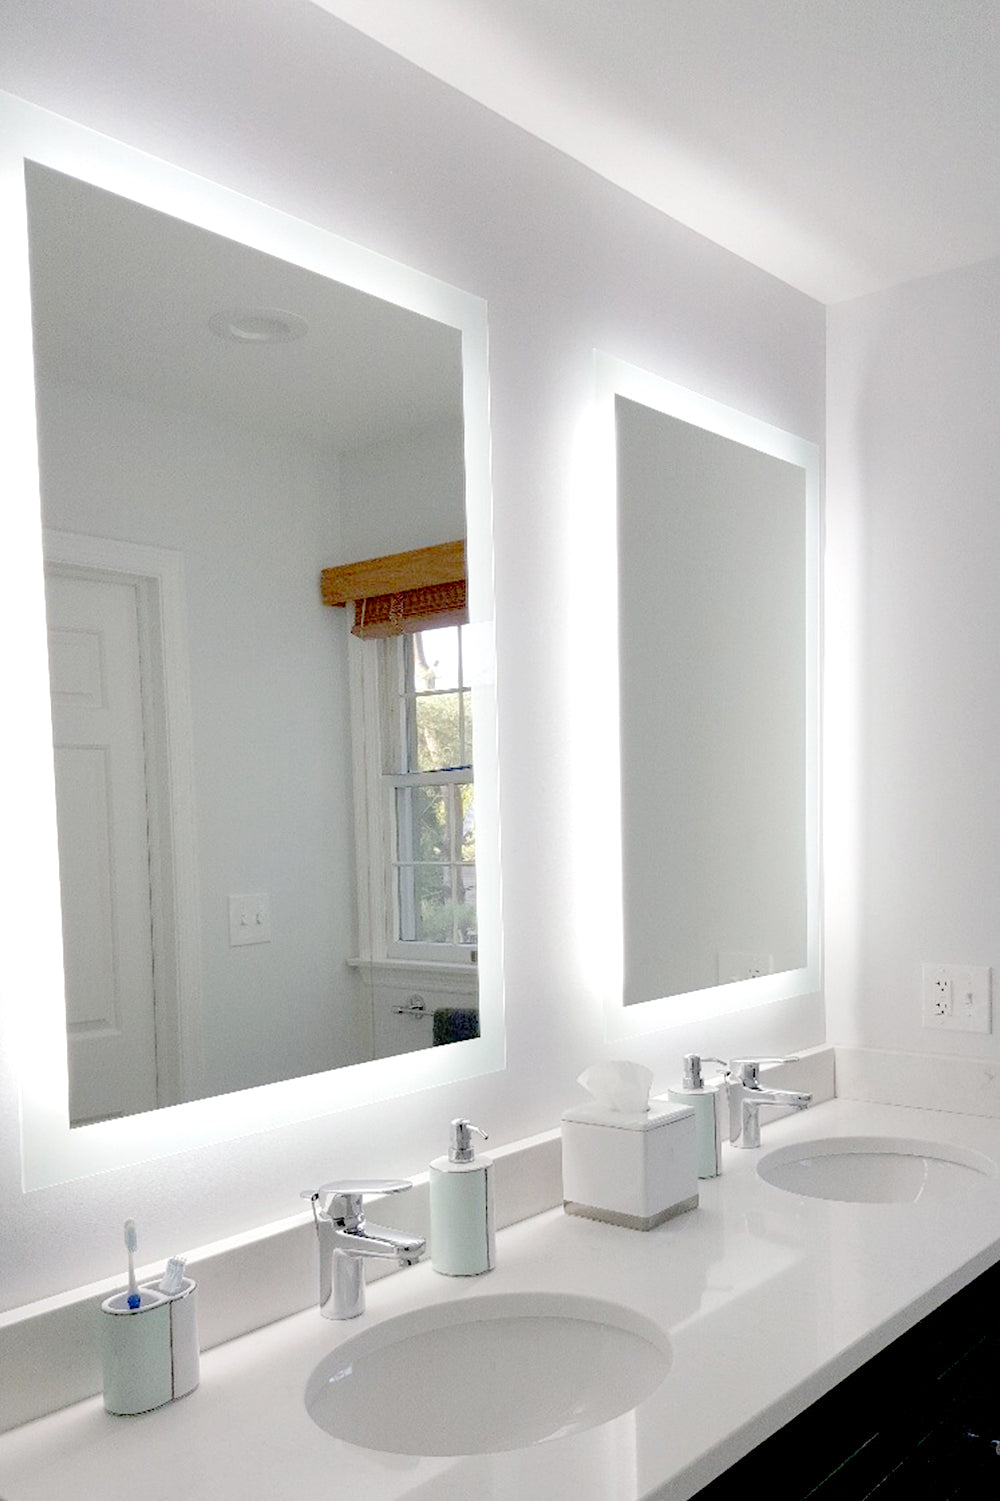 LED Mirror (Side-Lighted) 28" x 36" (or 36" x 28")